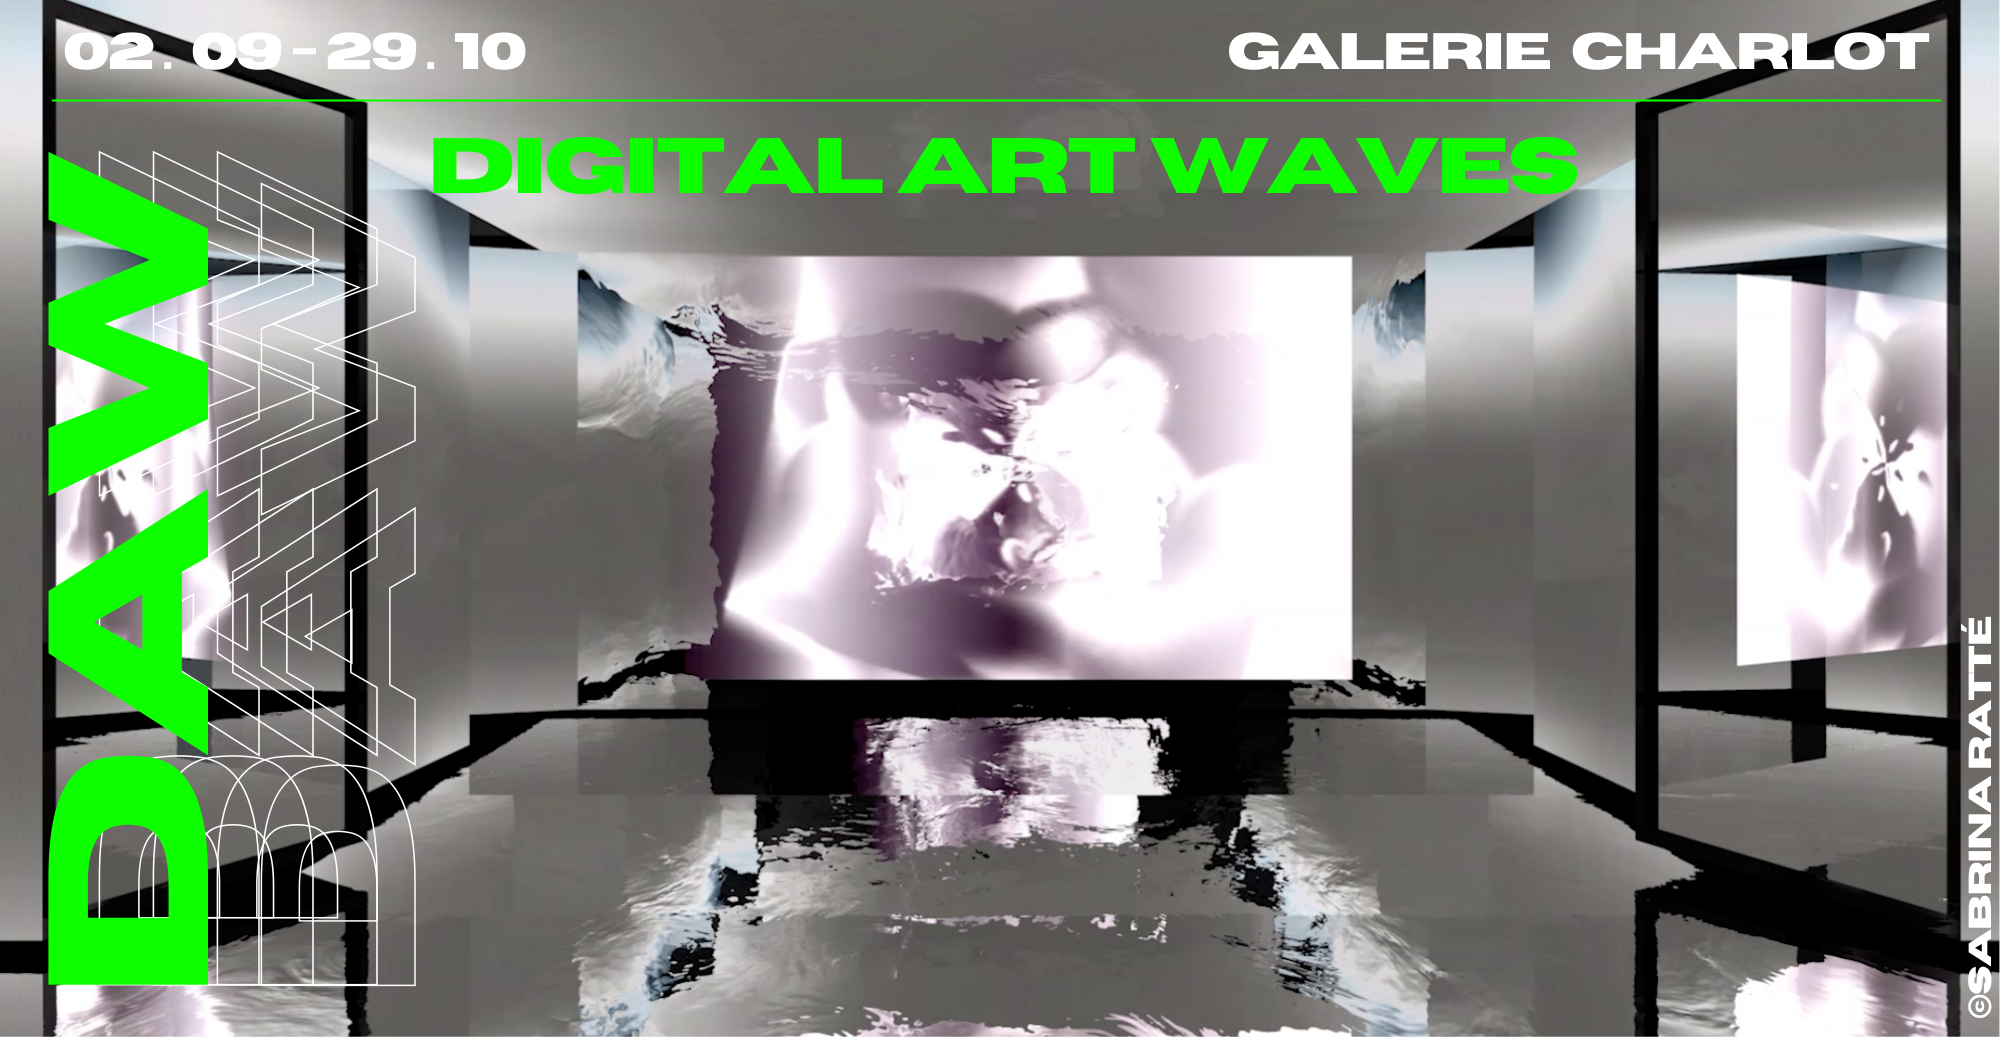 Digital Art Waves - Exhibition from 09/02/2022 to 10/29/2022 @ Galerie Charlot